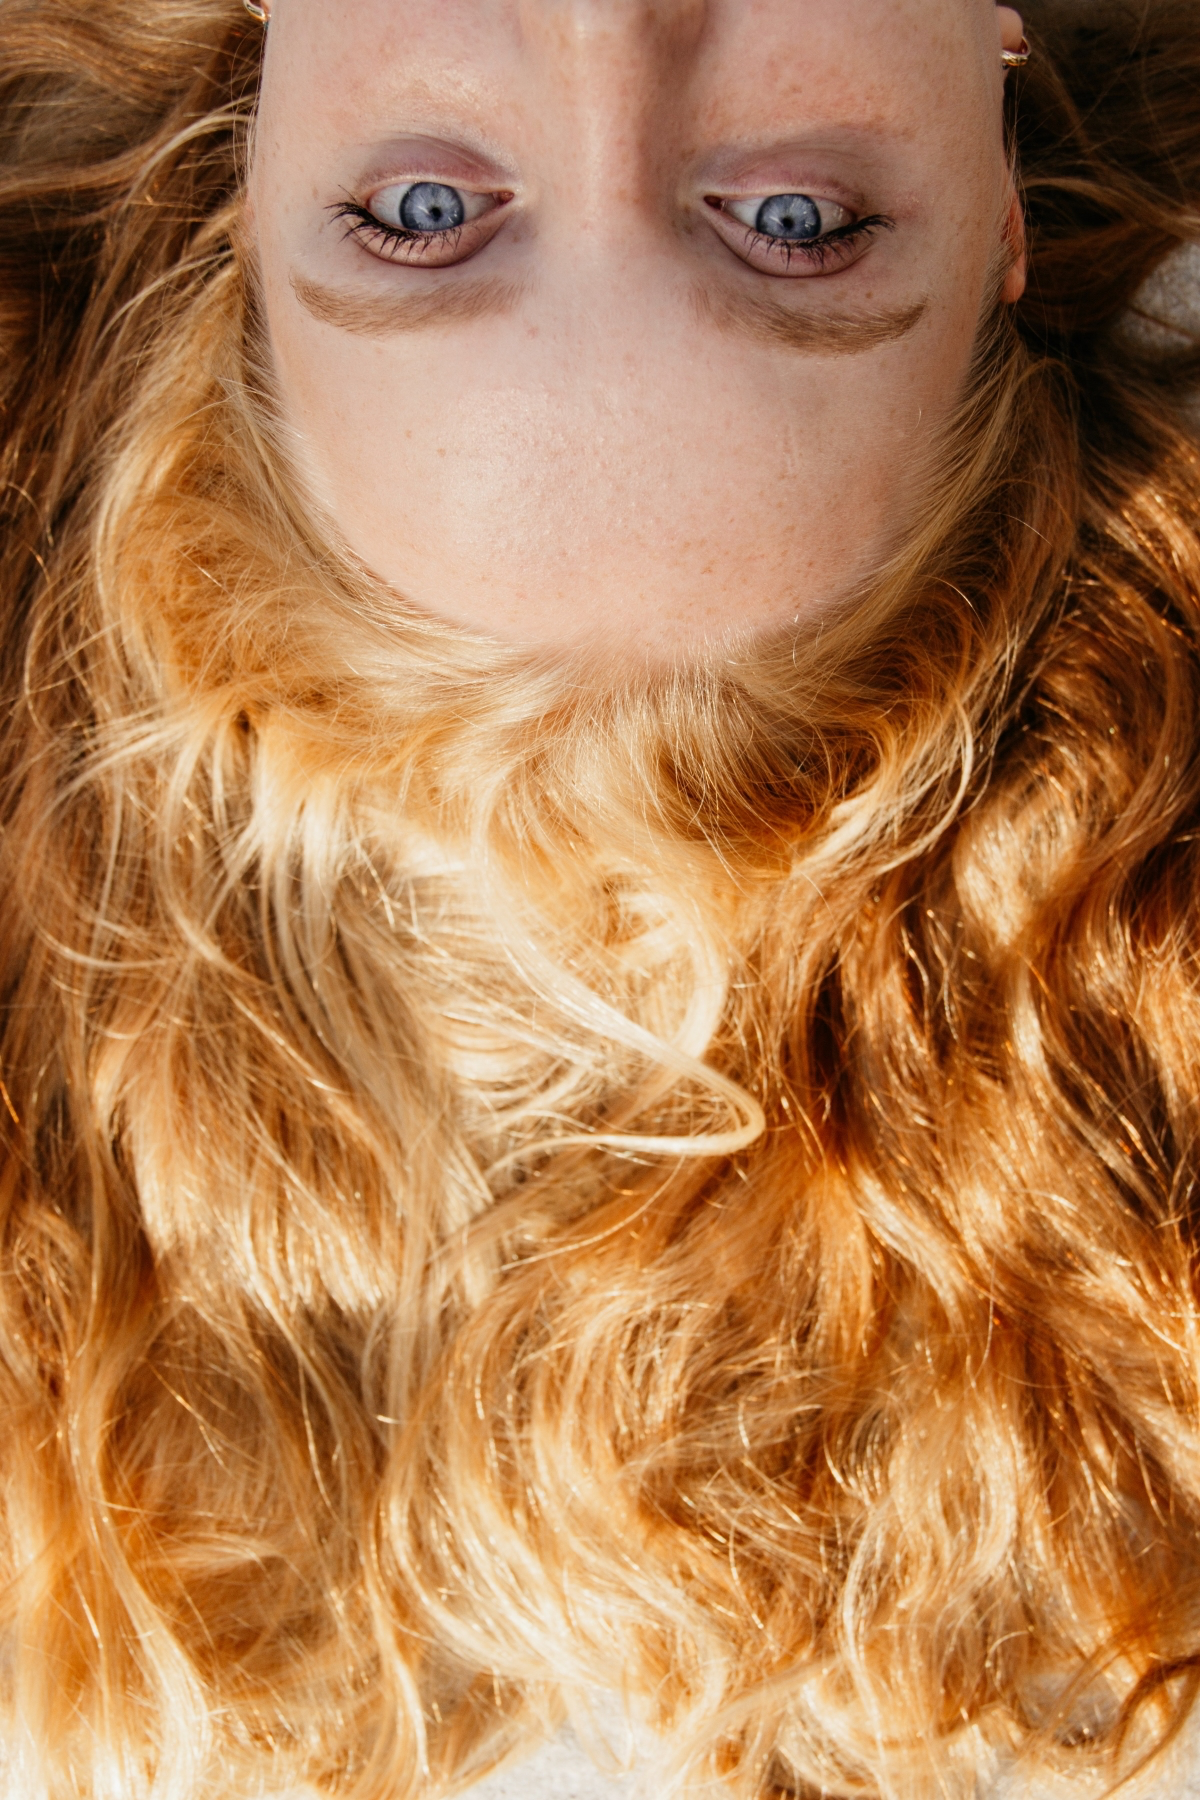 hair growth hacks that actually work